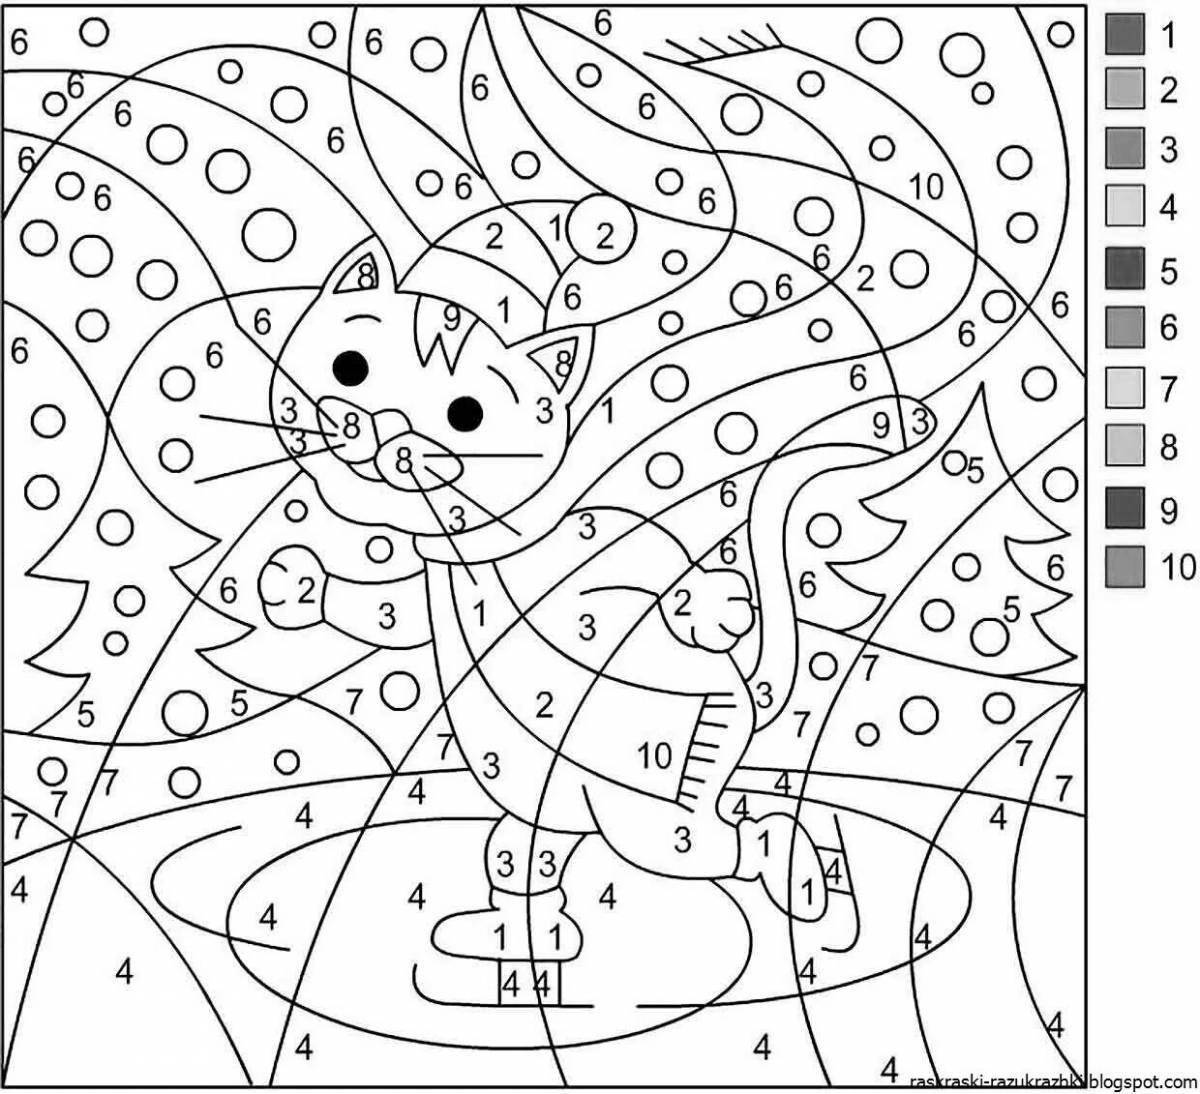 Fun coloring game for girls 3 years old